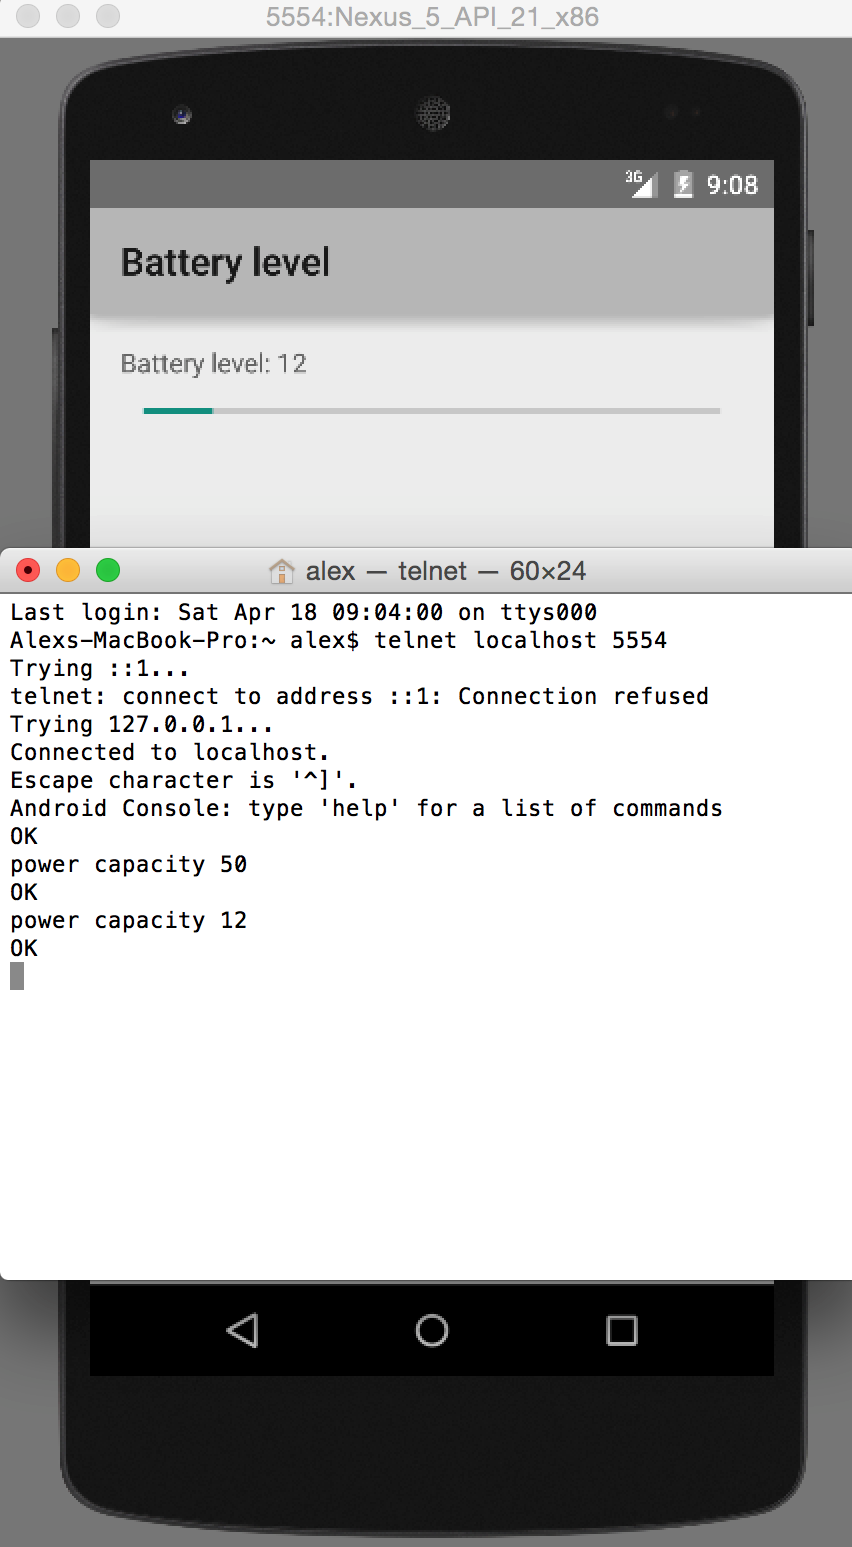 Changed battery level to 12% via terminal